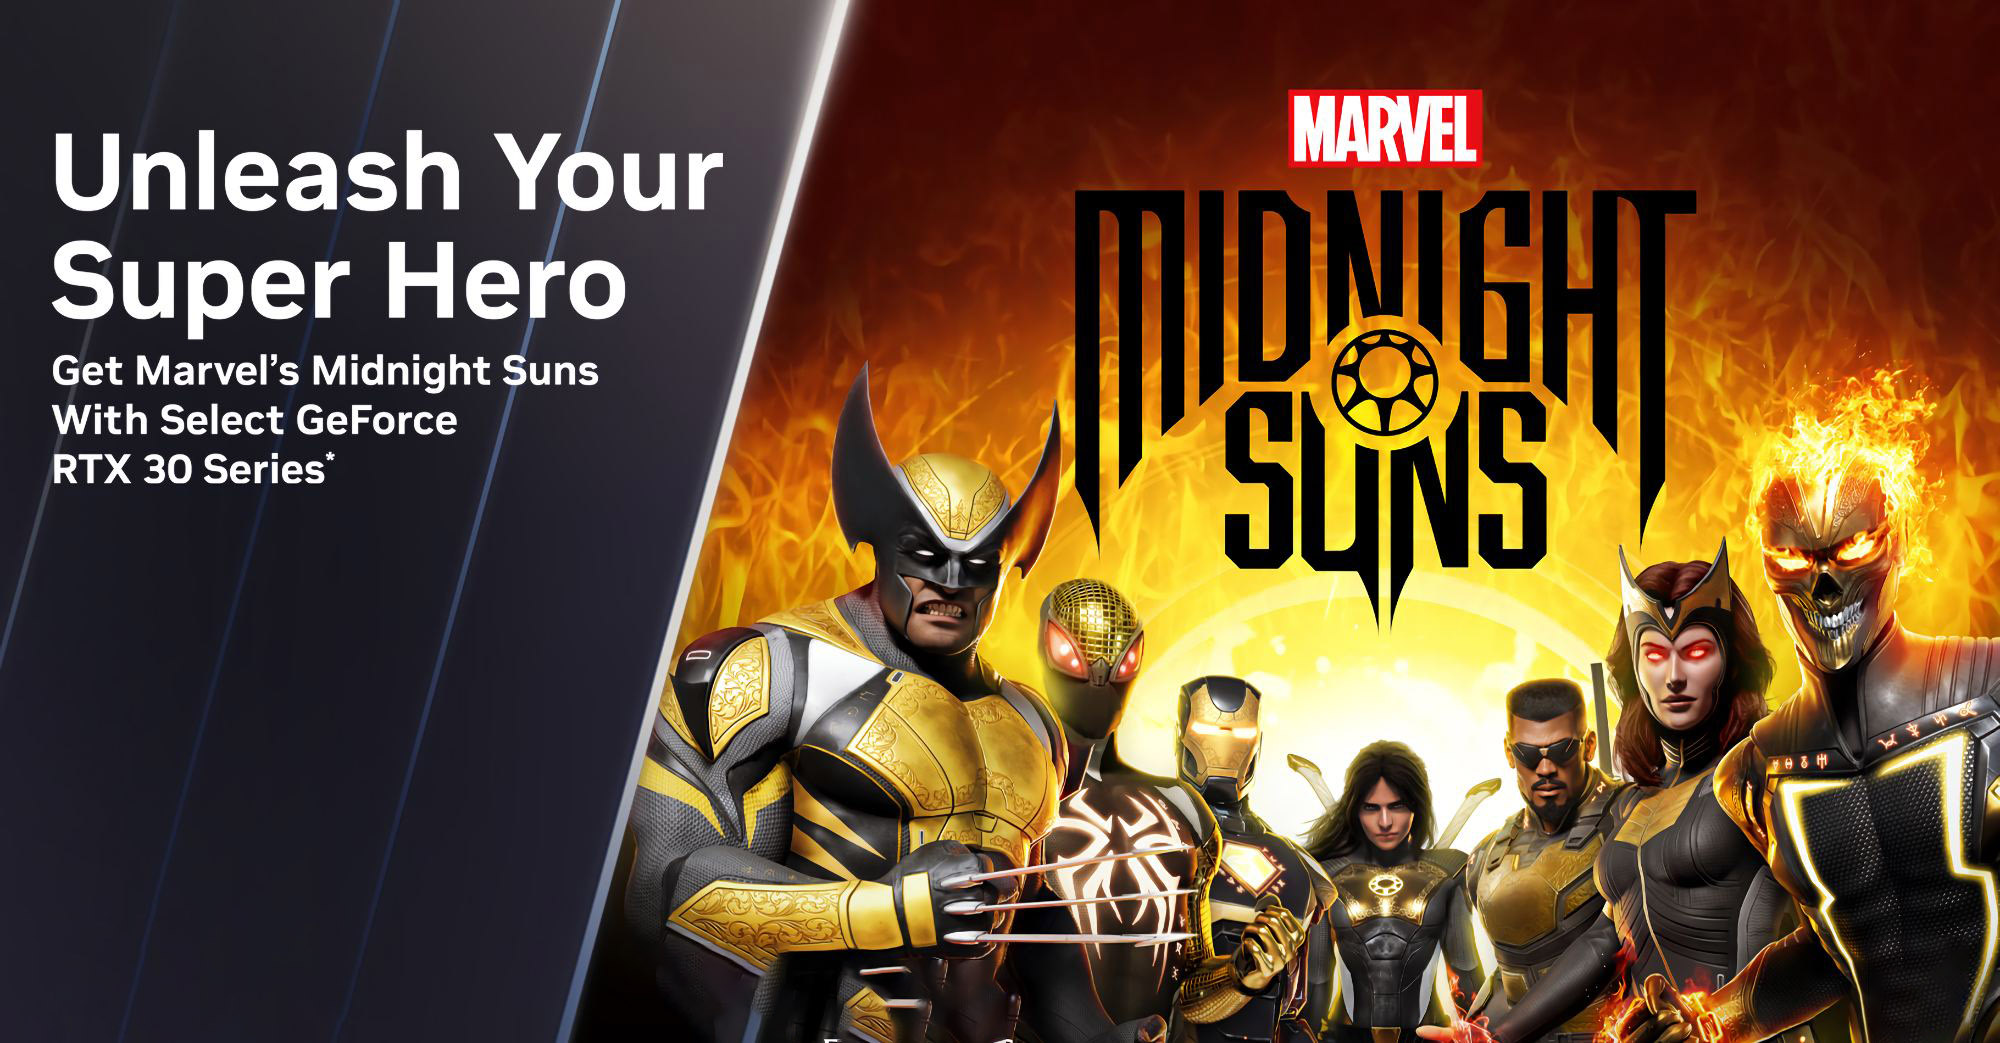 Marvel's Midnight Suns is Free to Play on Steam